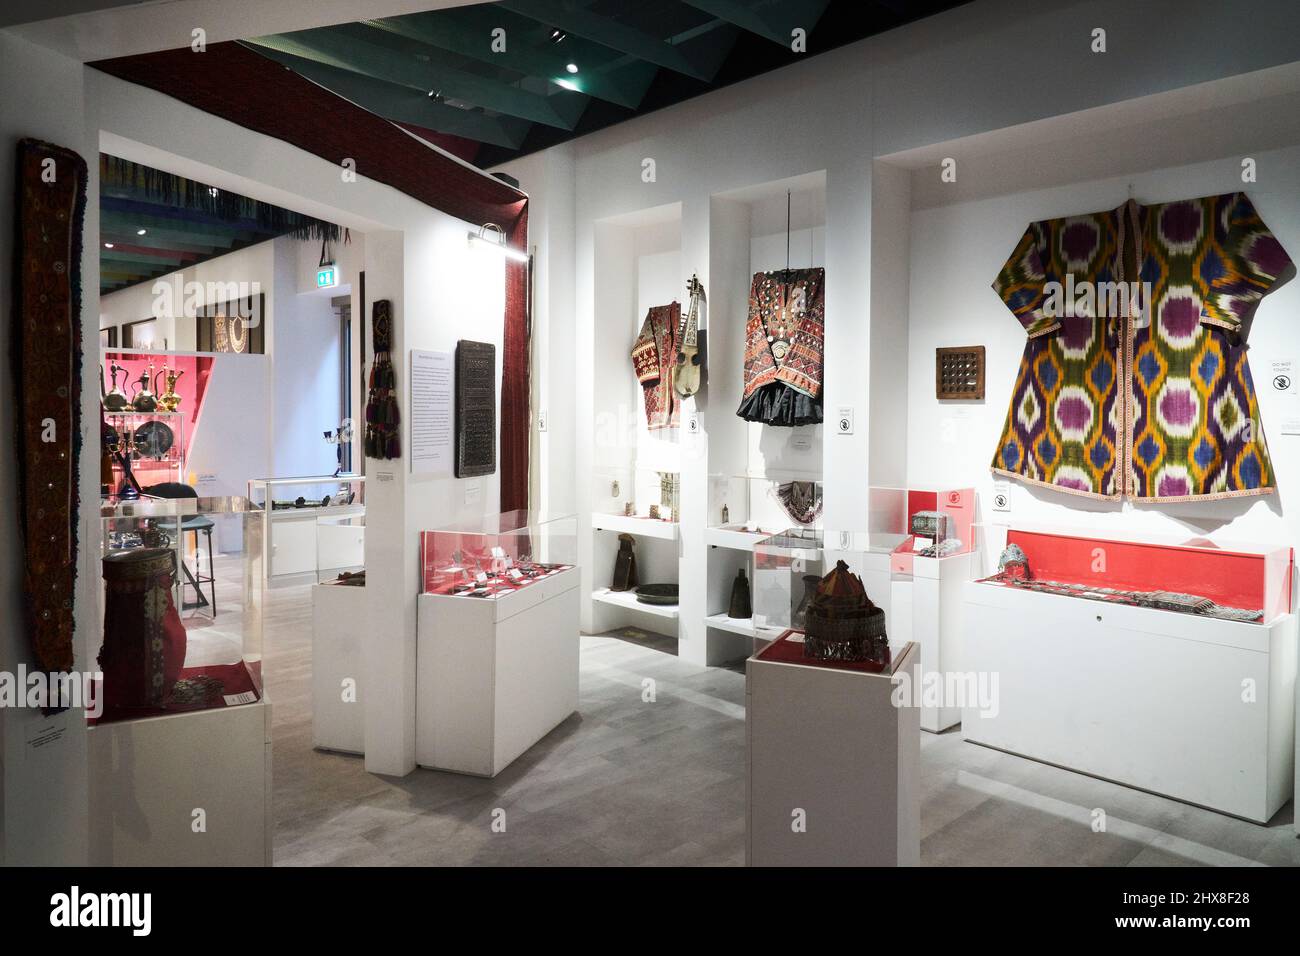 Interior of the Afghanistan pavilion at Dubai Expo2020, showing traditional Afghan items, photographed in February 2022 Stock Photo